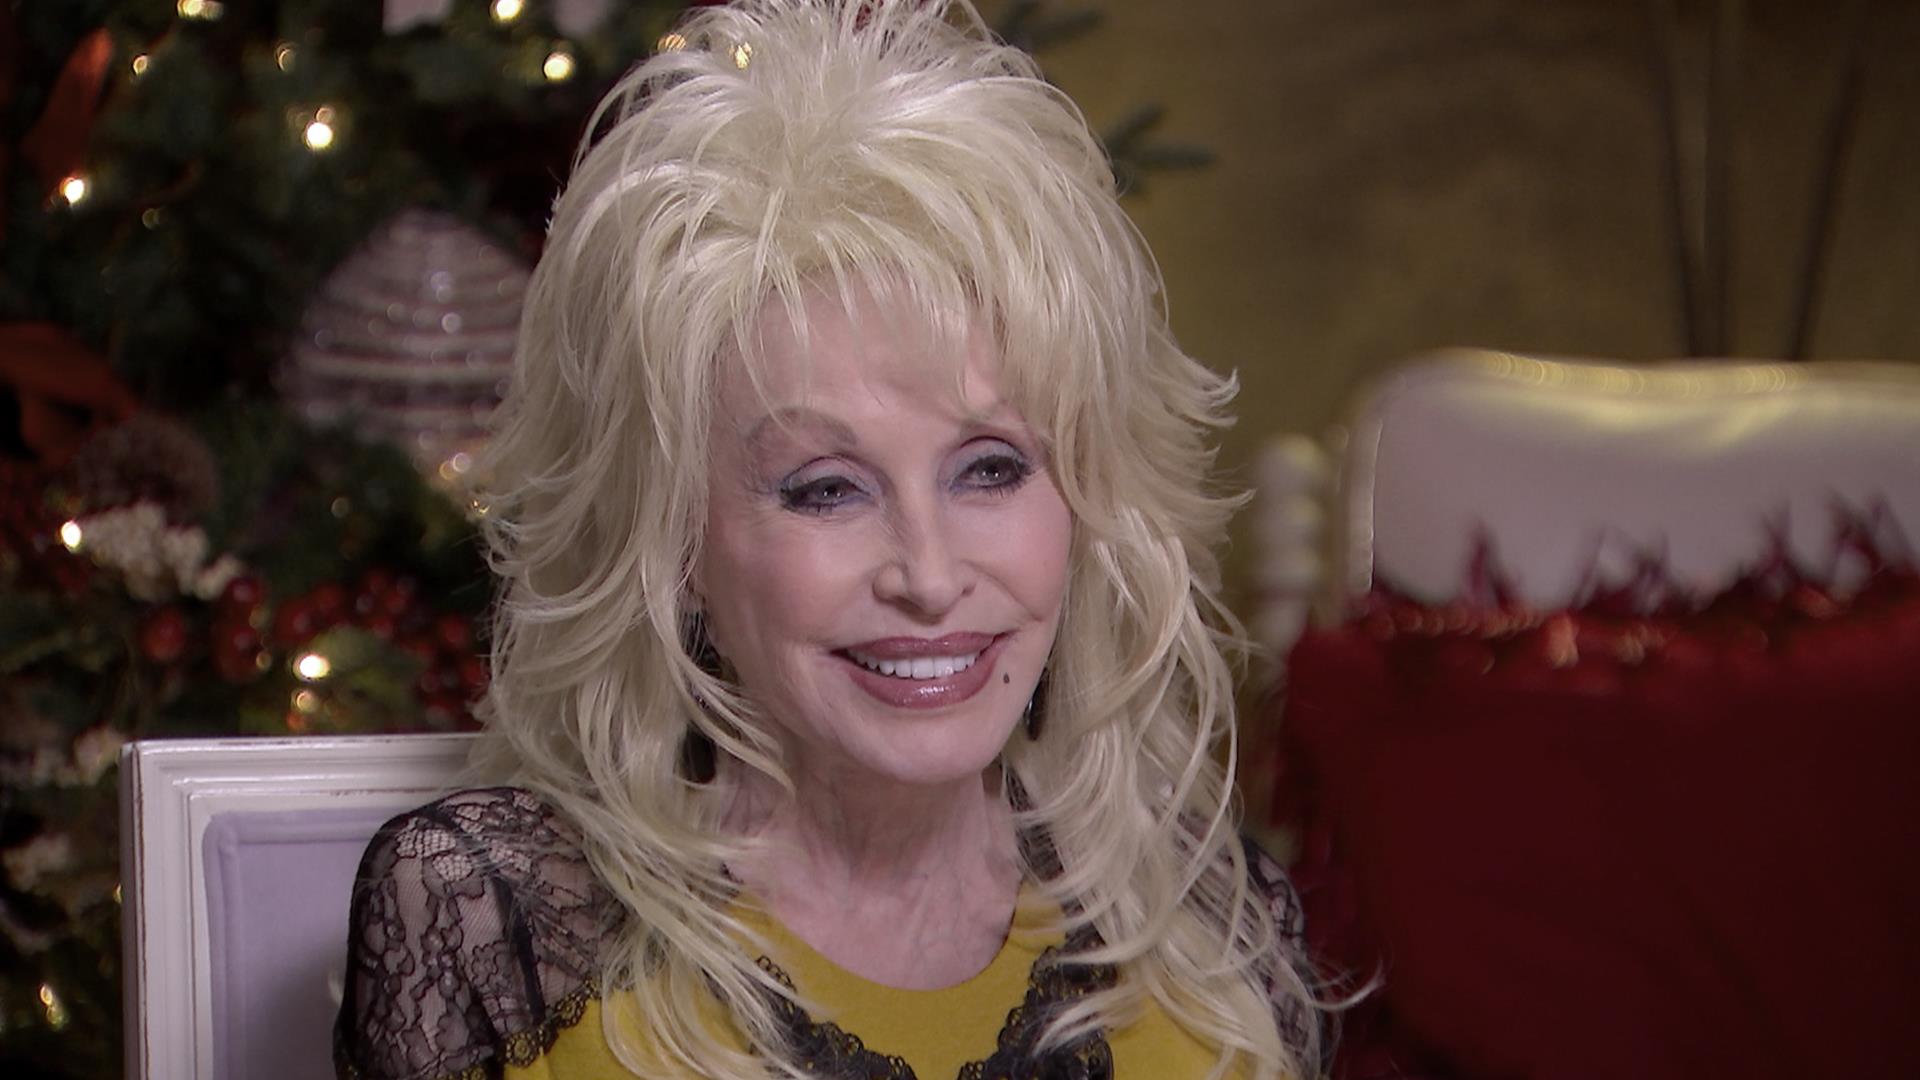 Dolly Parton: Even without electricity, my family had fun on Christmas